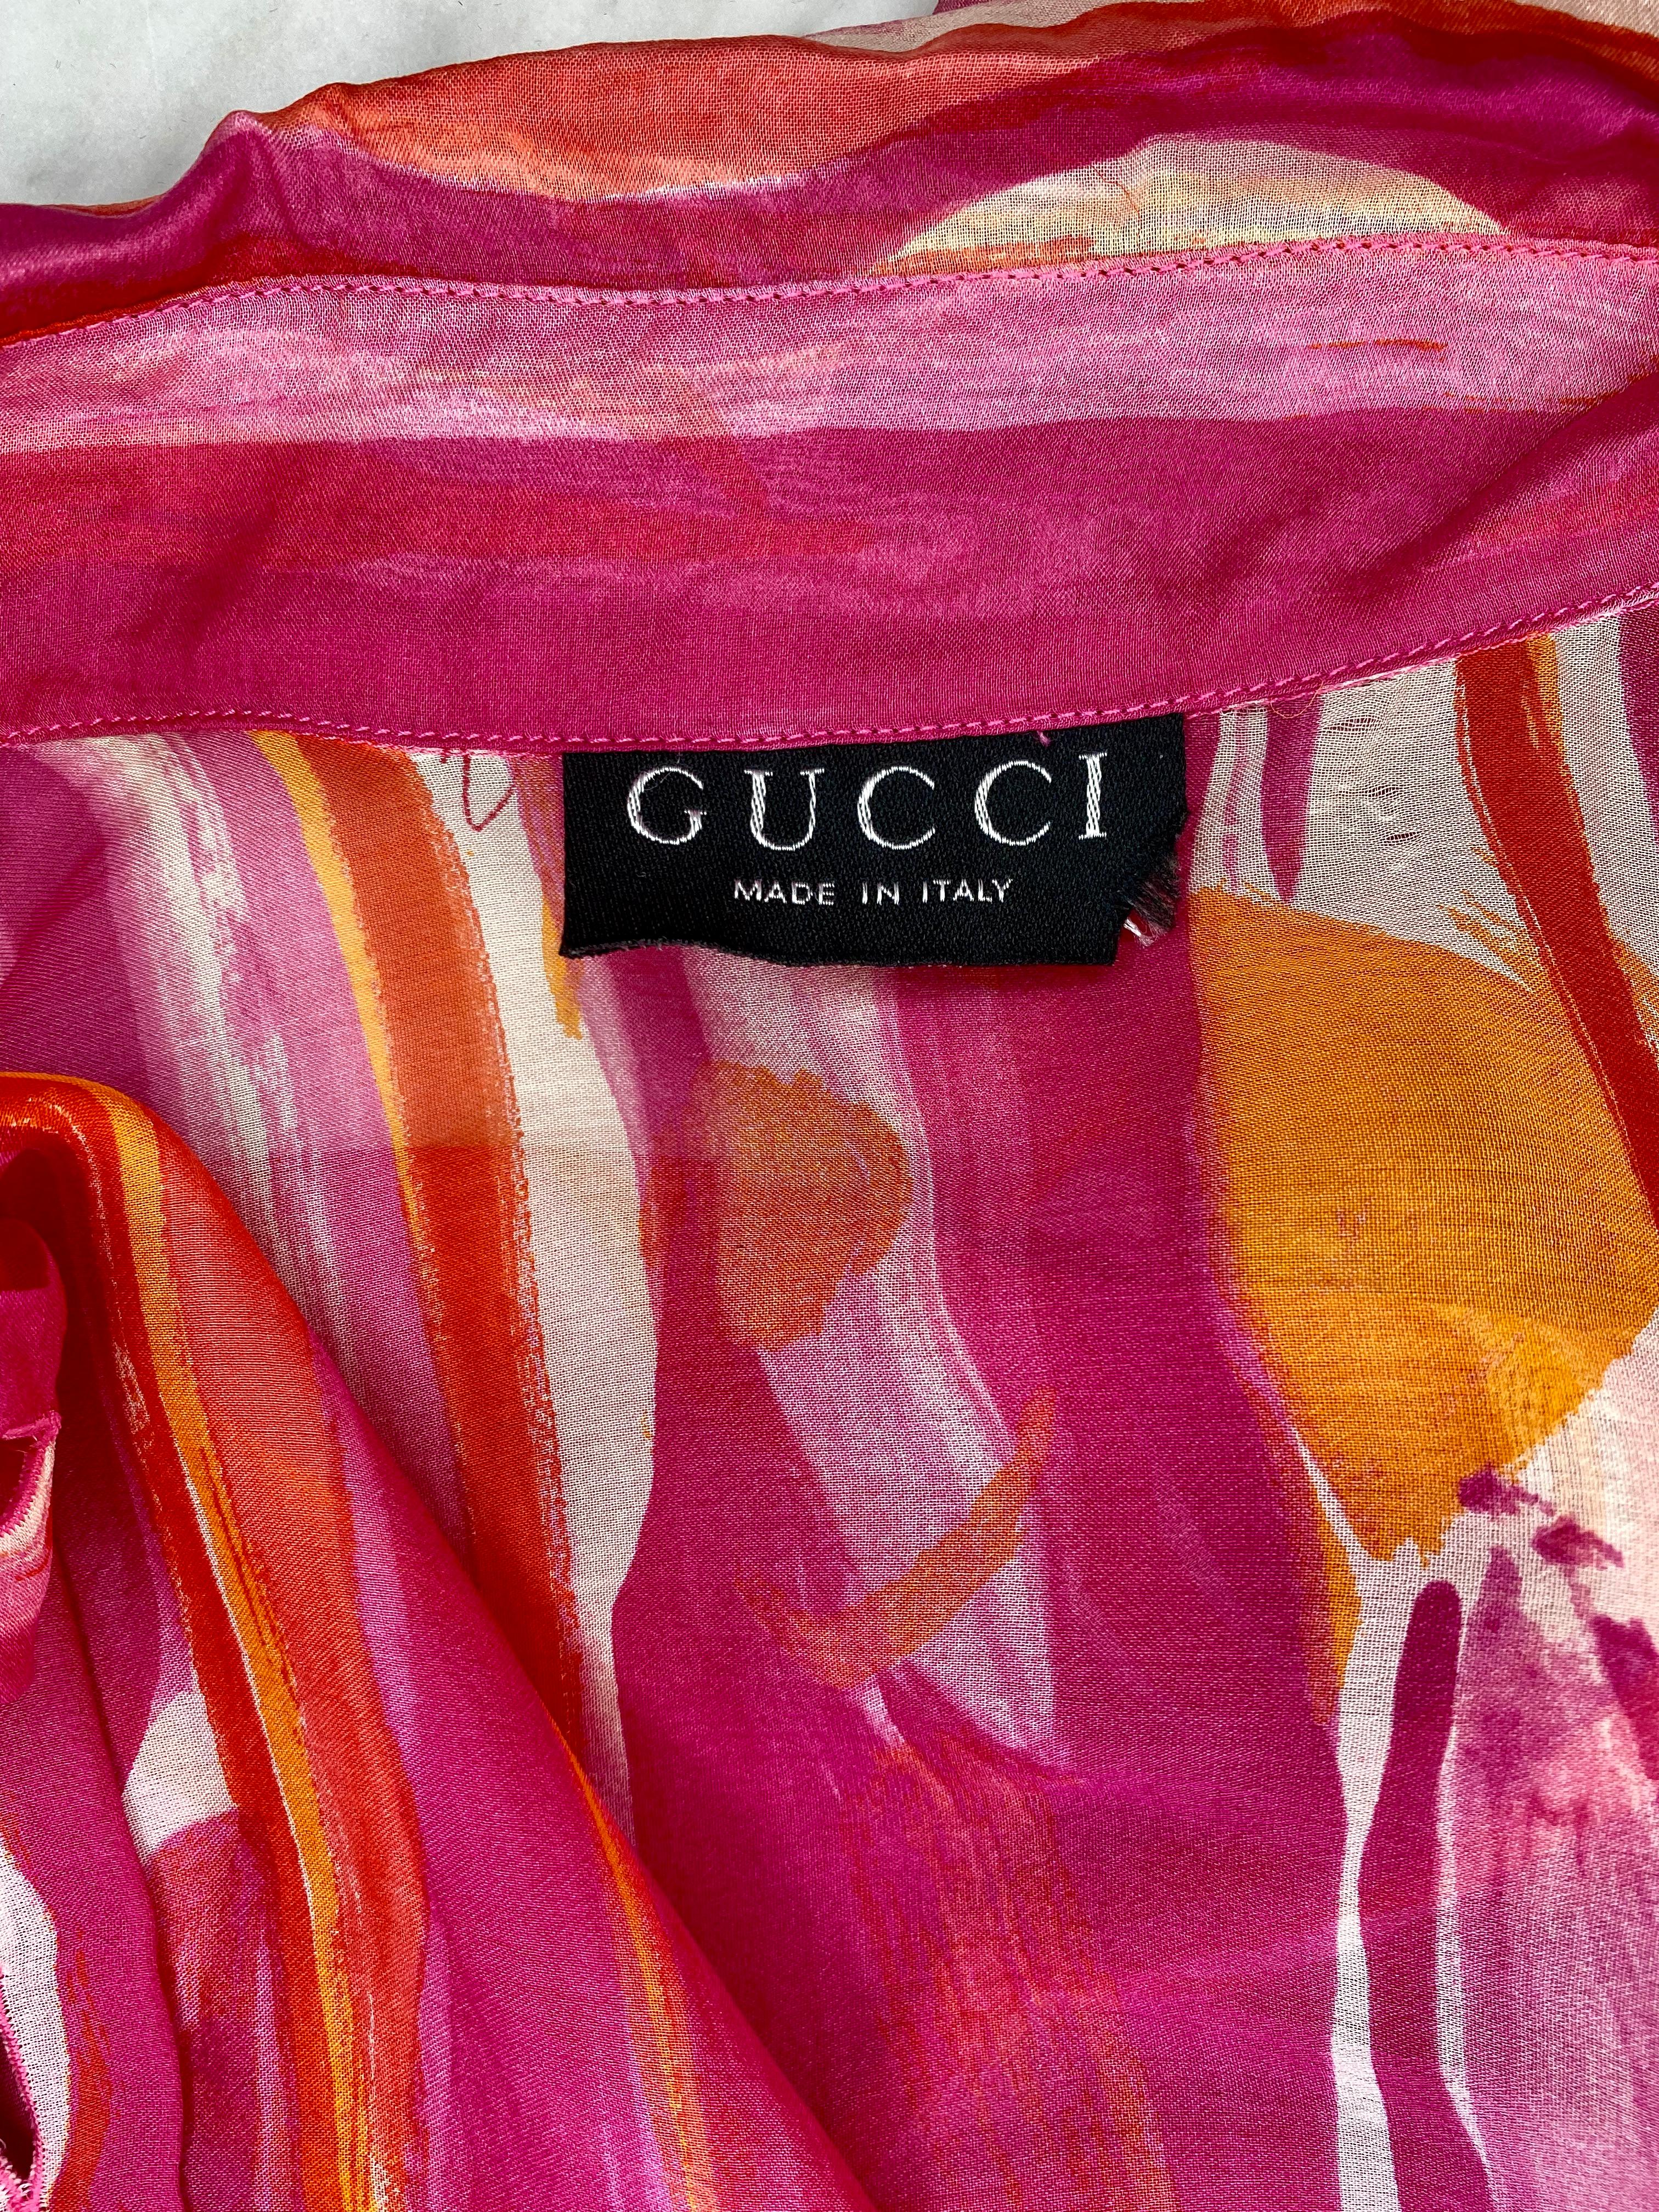 S/S 1996 Gucci by Tom Ford Pink Orange Sheer Abstract Watercolor Button Up Top 1